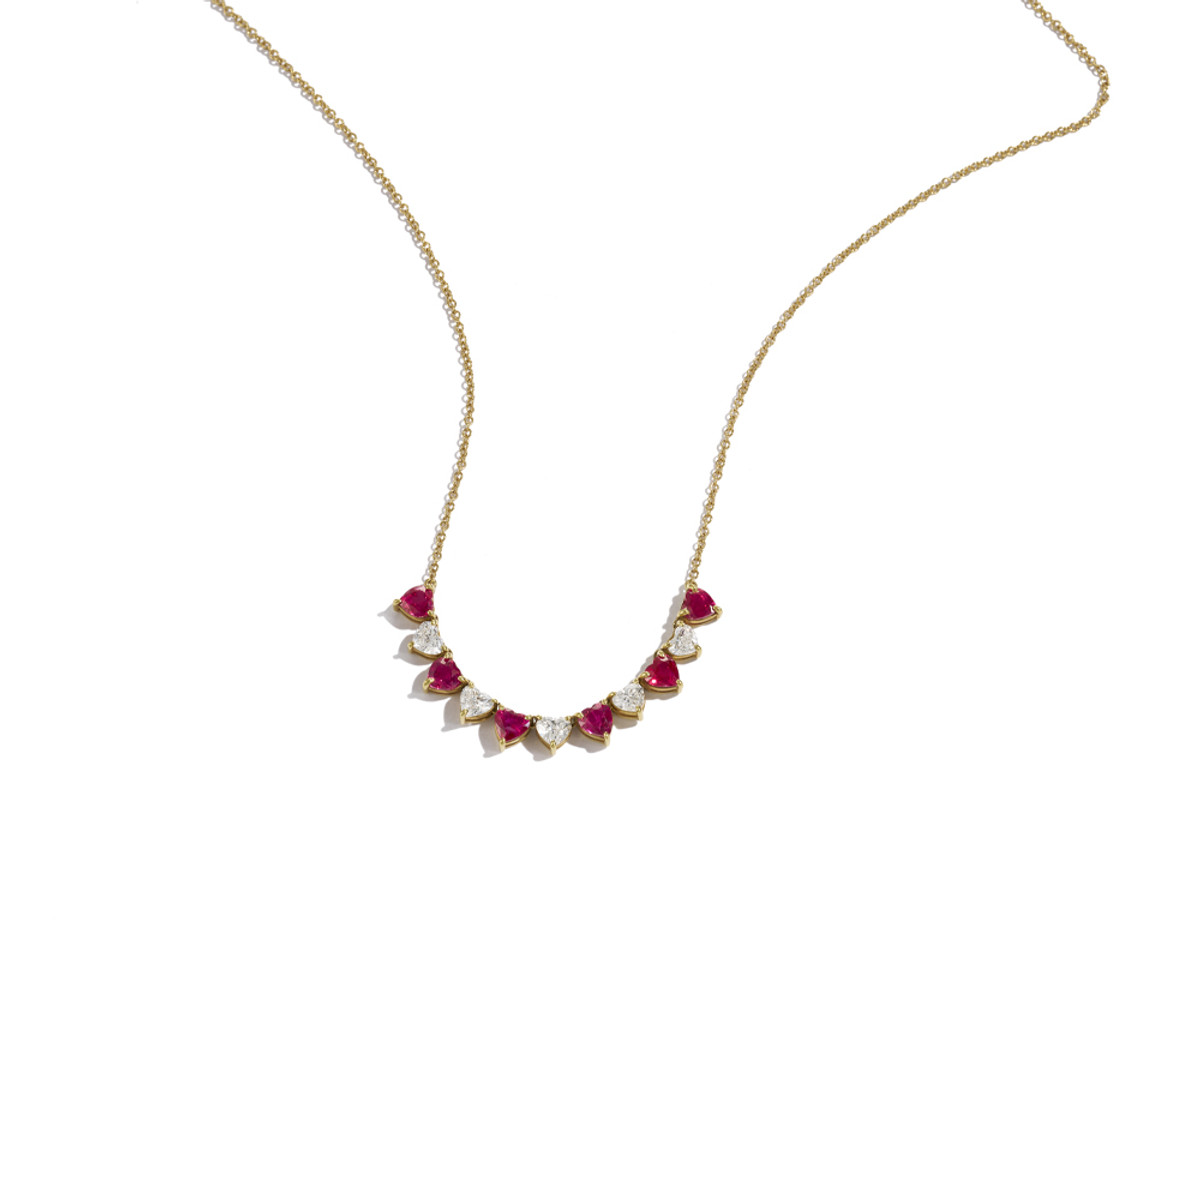 18K Yellow Gold 1.90ct Diamond & 2.48 Ruby Heart Necklace-44015 Product Image